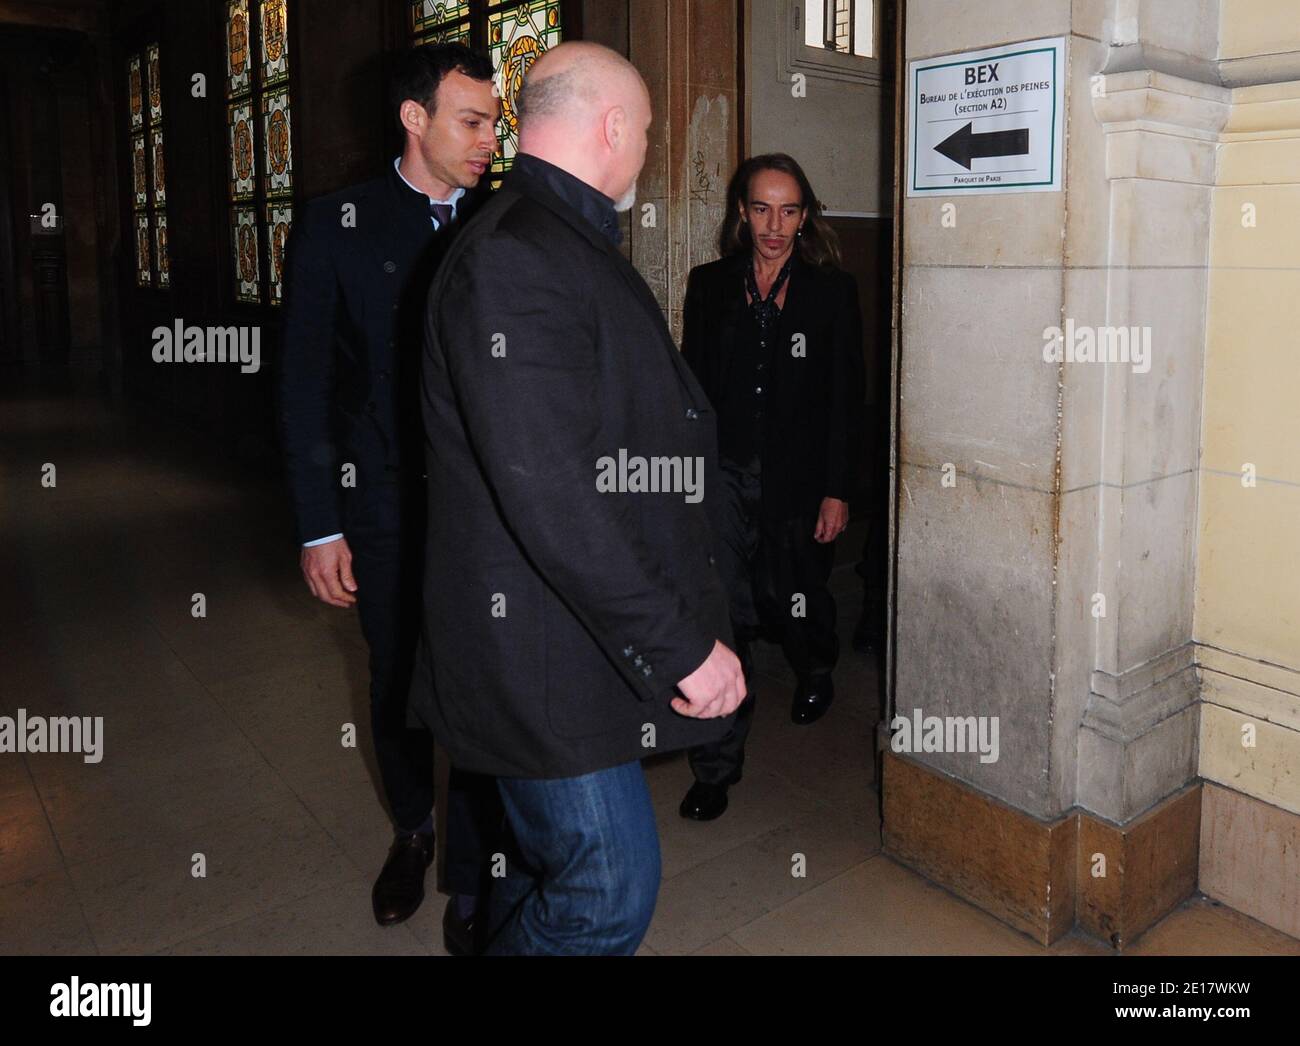 British fashion designer John Galliano and friend Alexis Roche arrive at  the Paris' courthouse, France on June 22, 2011. John Galliano charged with  hurling anti-Semitic slurs in a Paris cafe - allegations